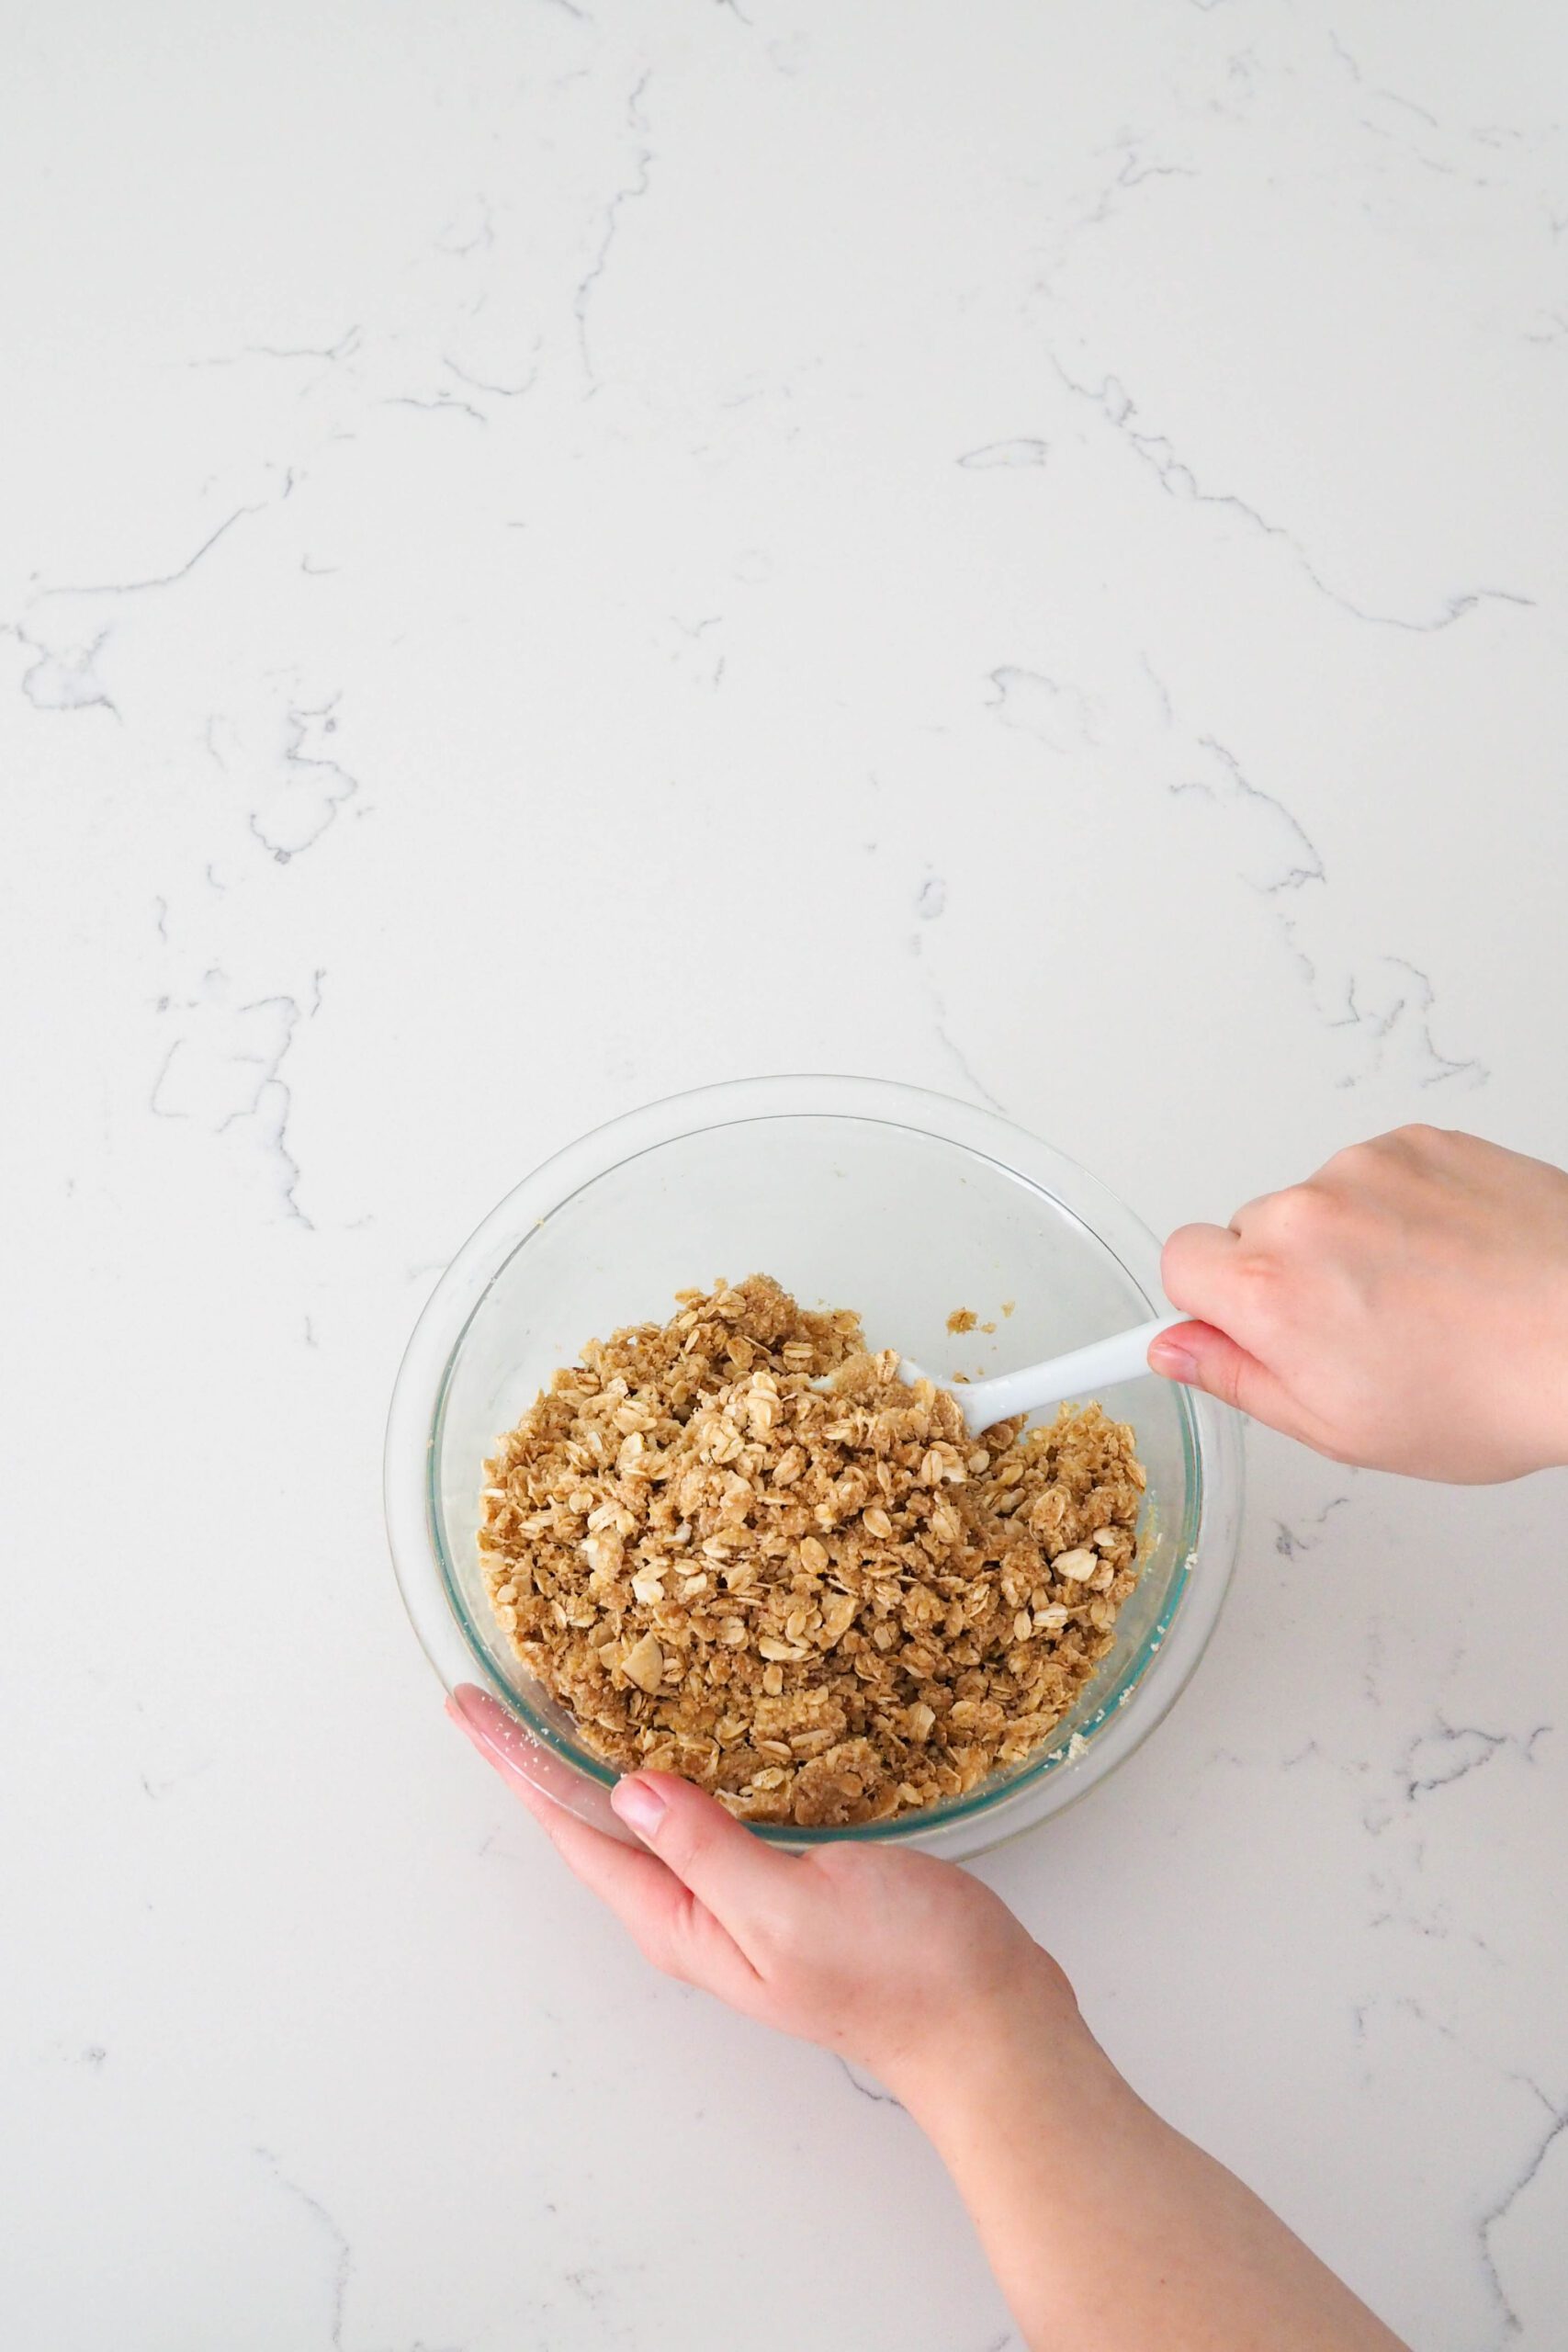 Two hands stir together oats and dry ingredients in a glass bowl.